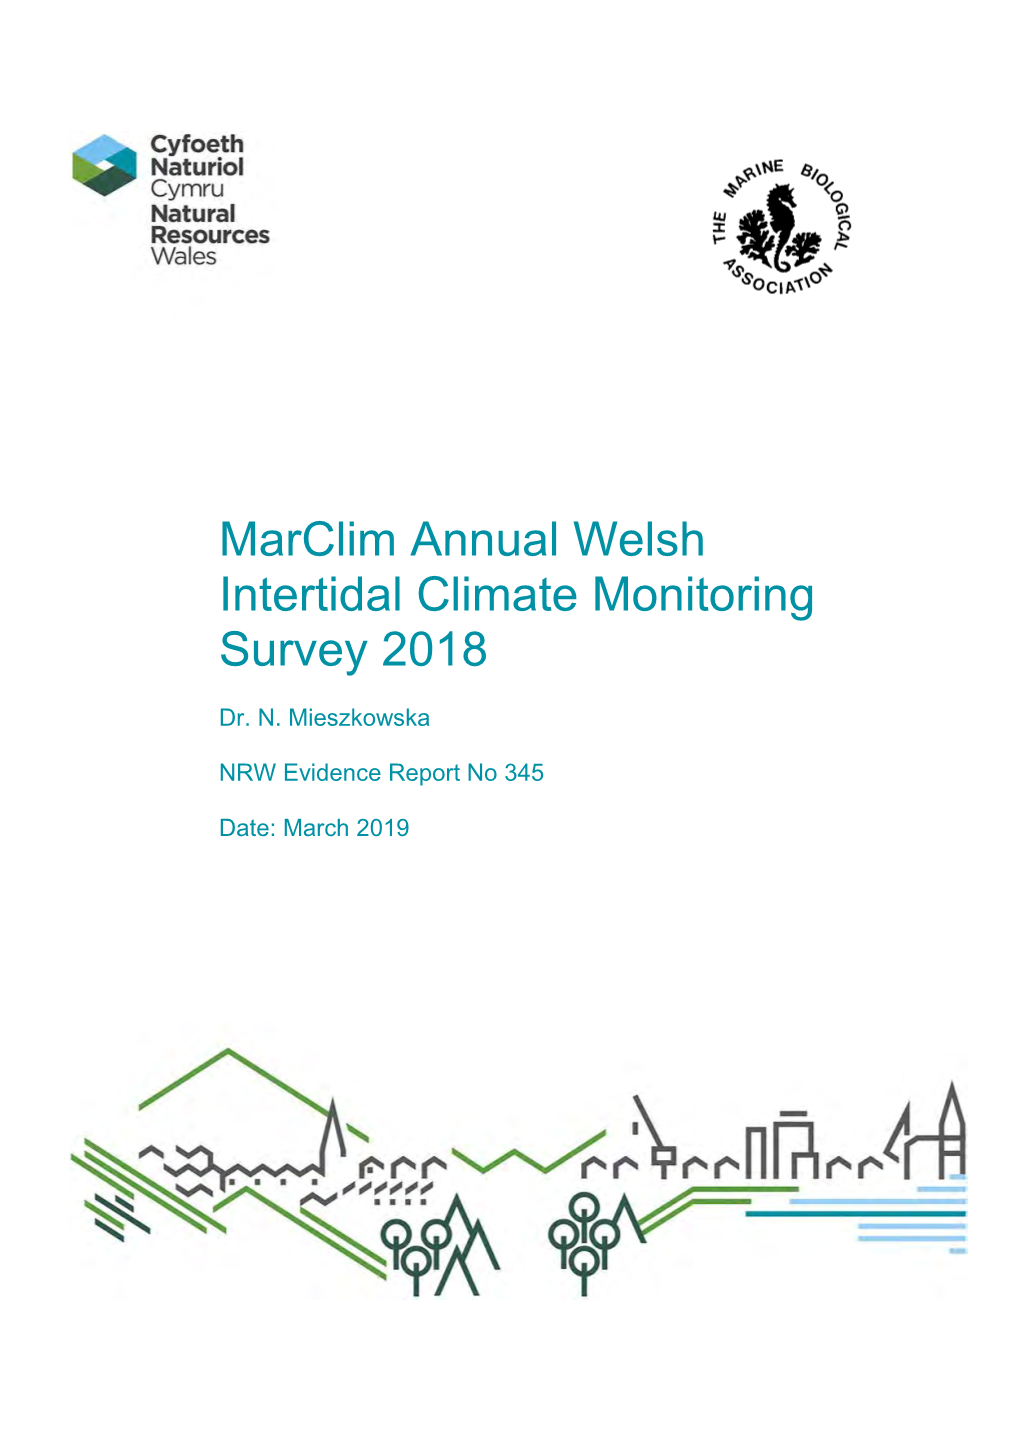 Marclim Annual Welsh Intertidal Climate Monitoring Survey 2018